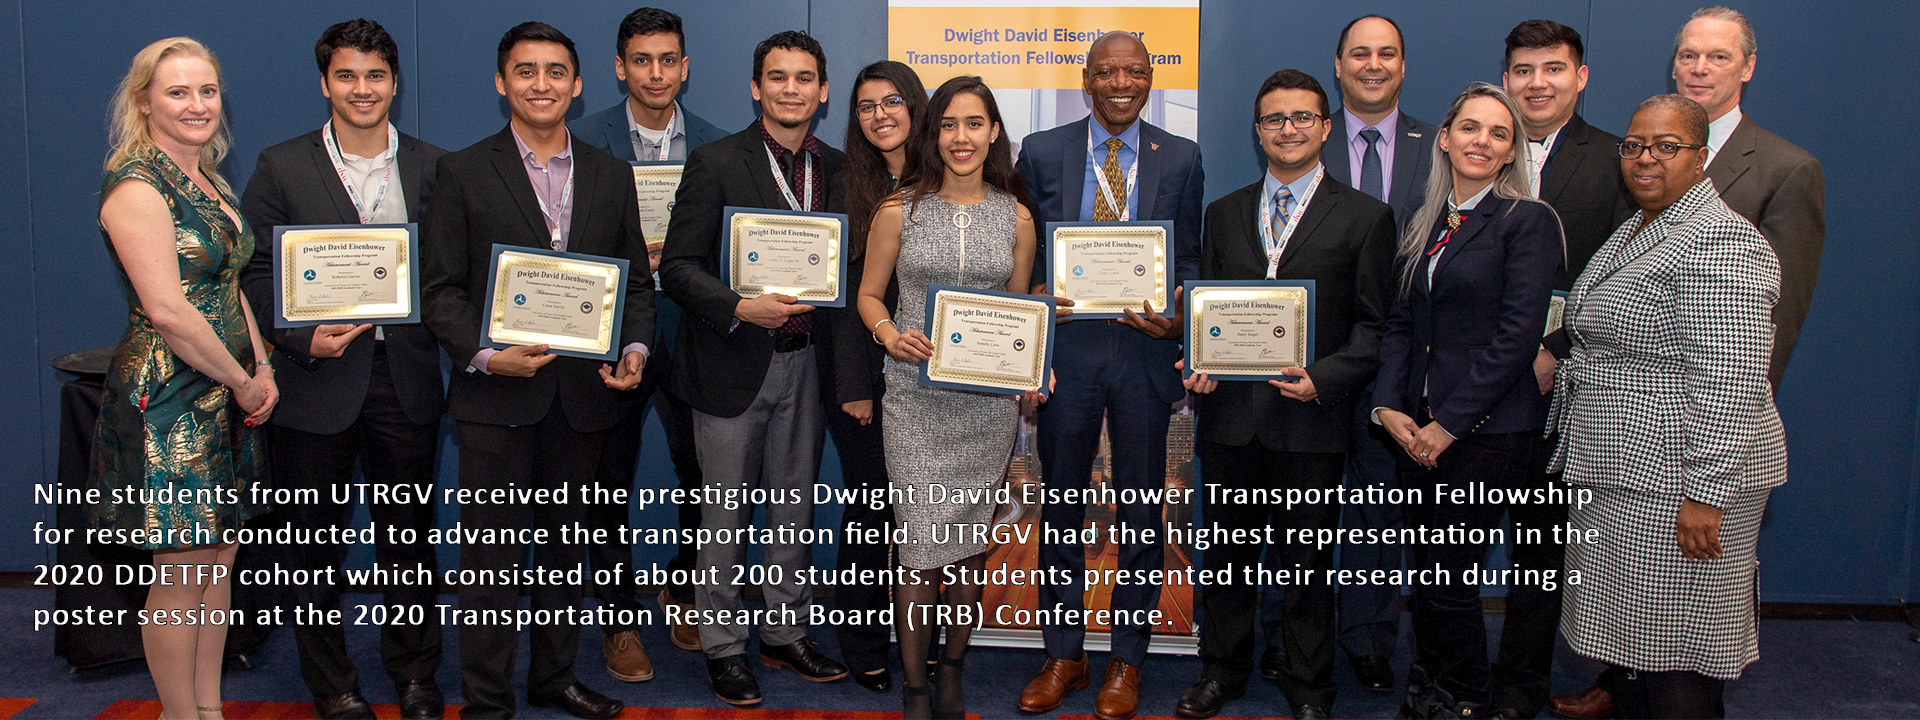 2020 DDETFP Recipients from UTRGV Accompanied by UTCRS Director